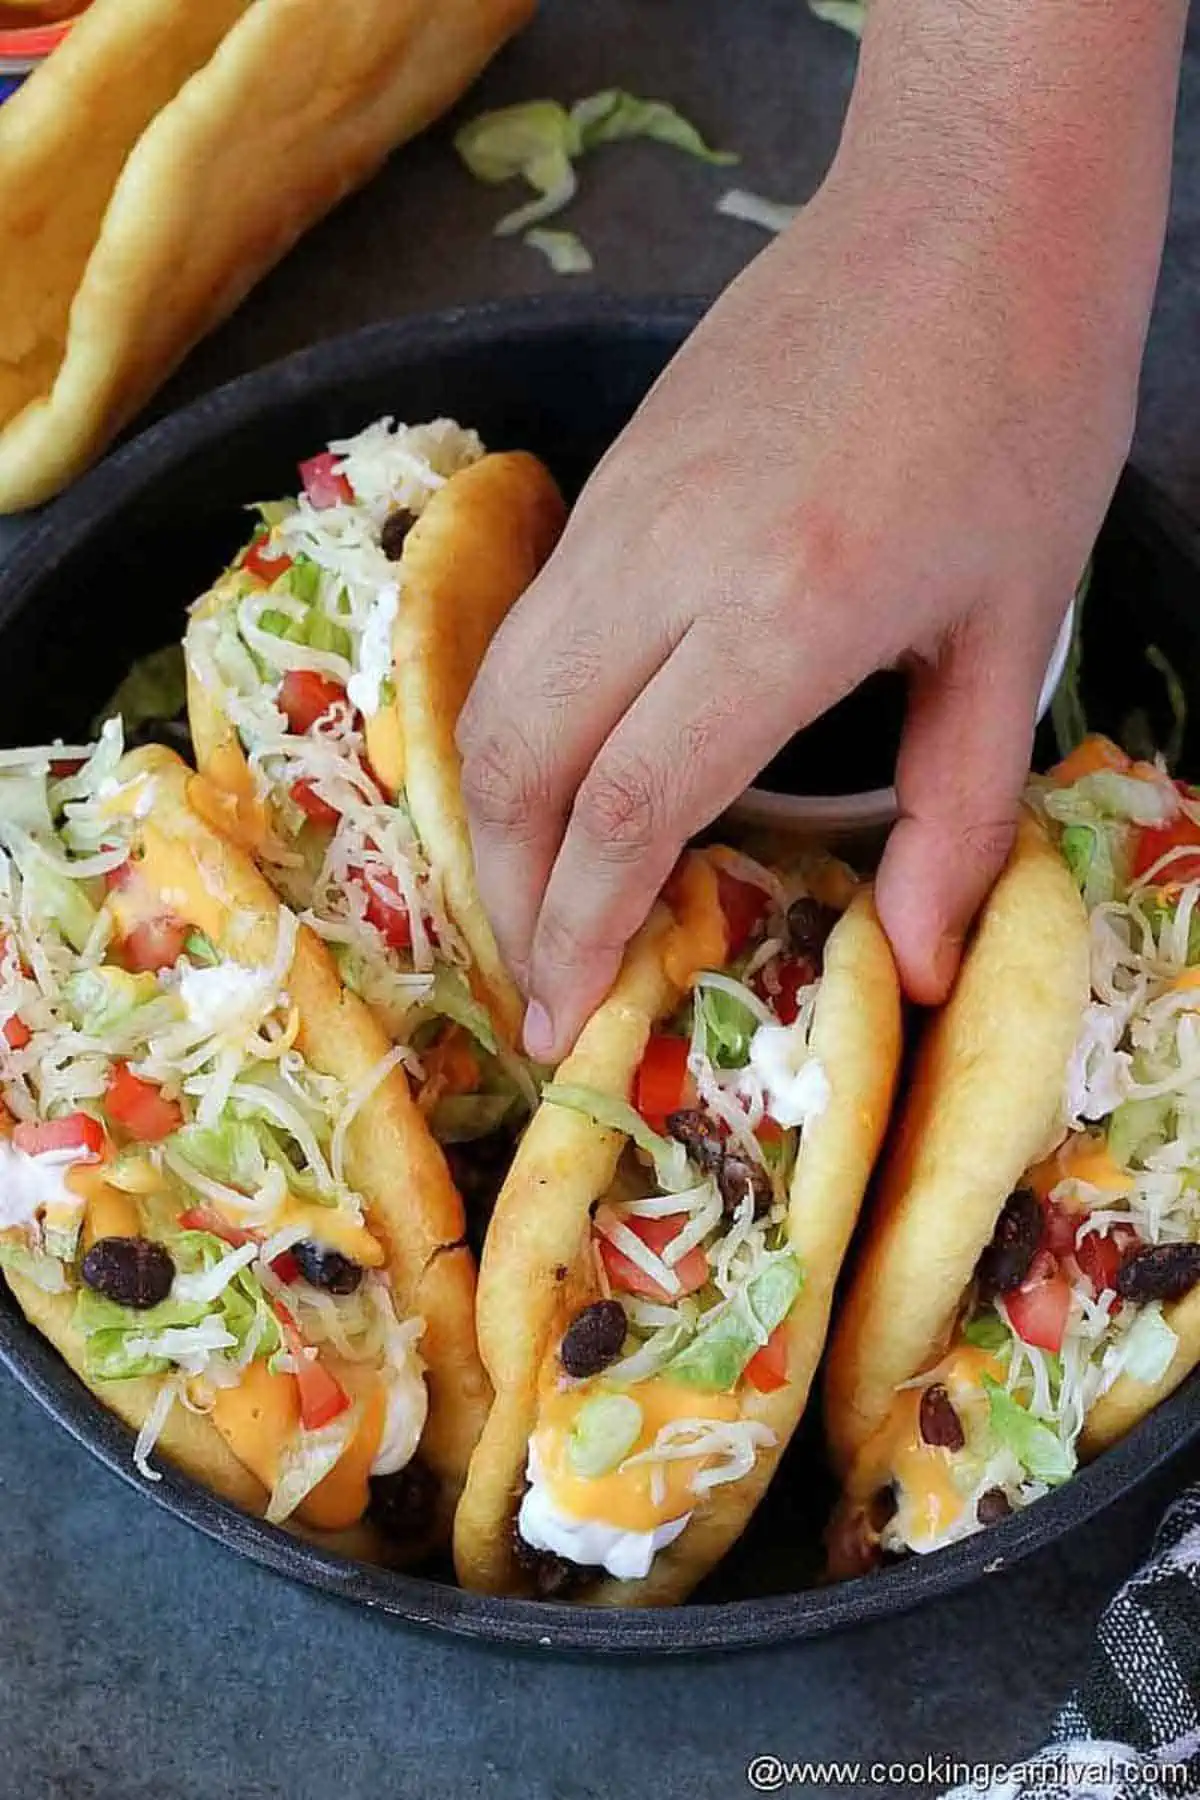 Grabbing one homemade chalupa from the plate.